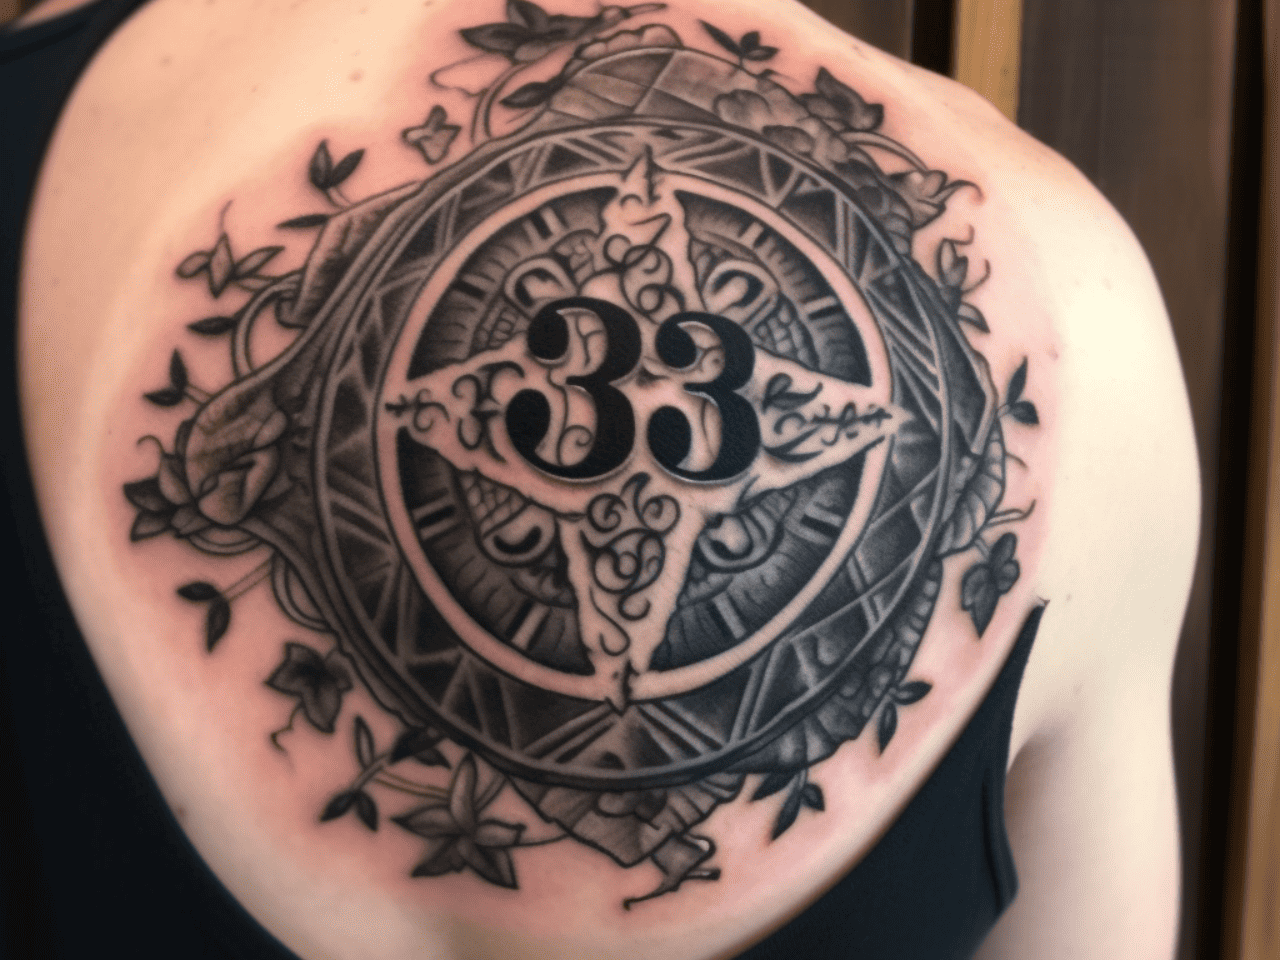 10 Best strength tattoo ideas worth trying in 2022